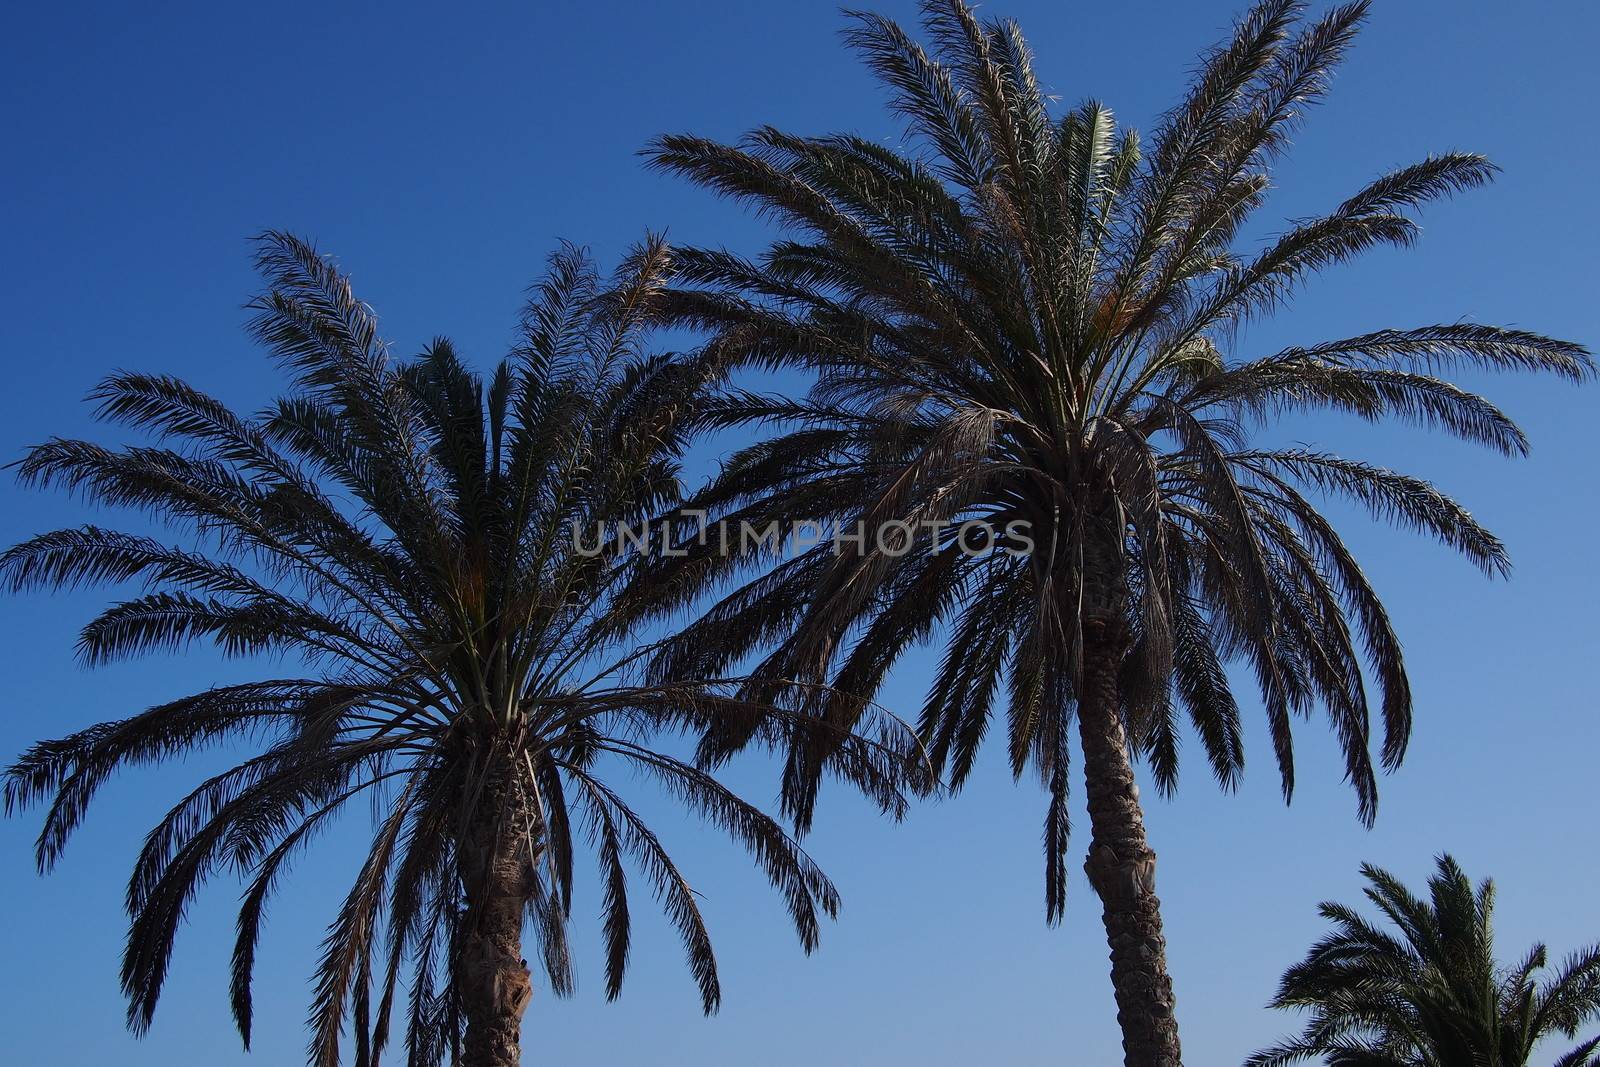 Two long and tall palm trees